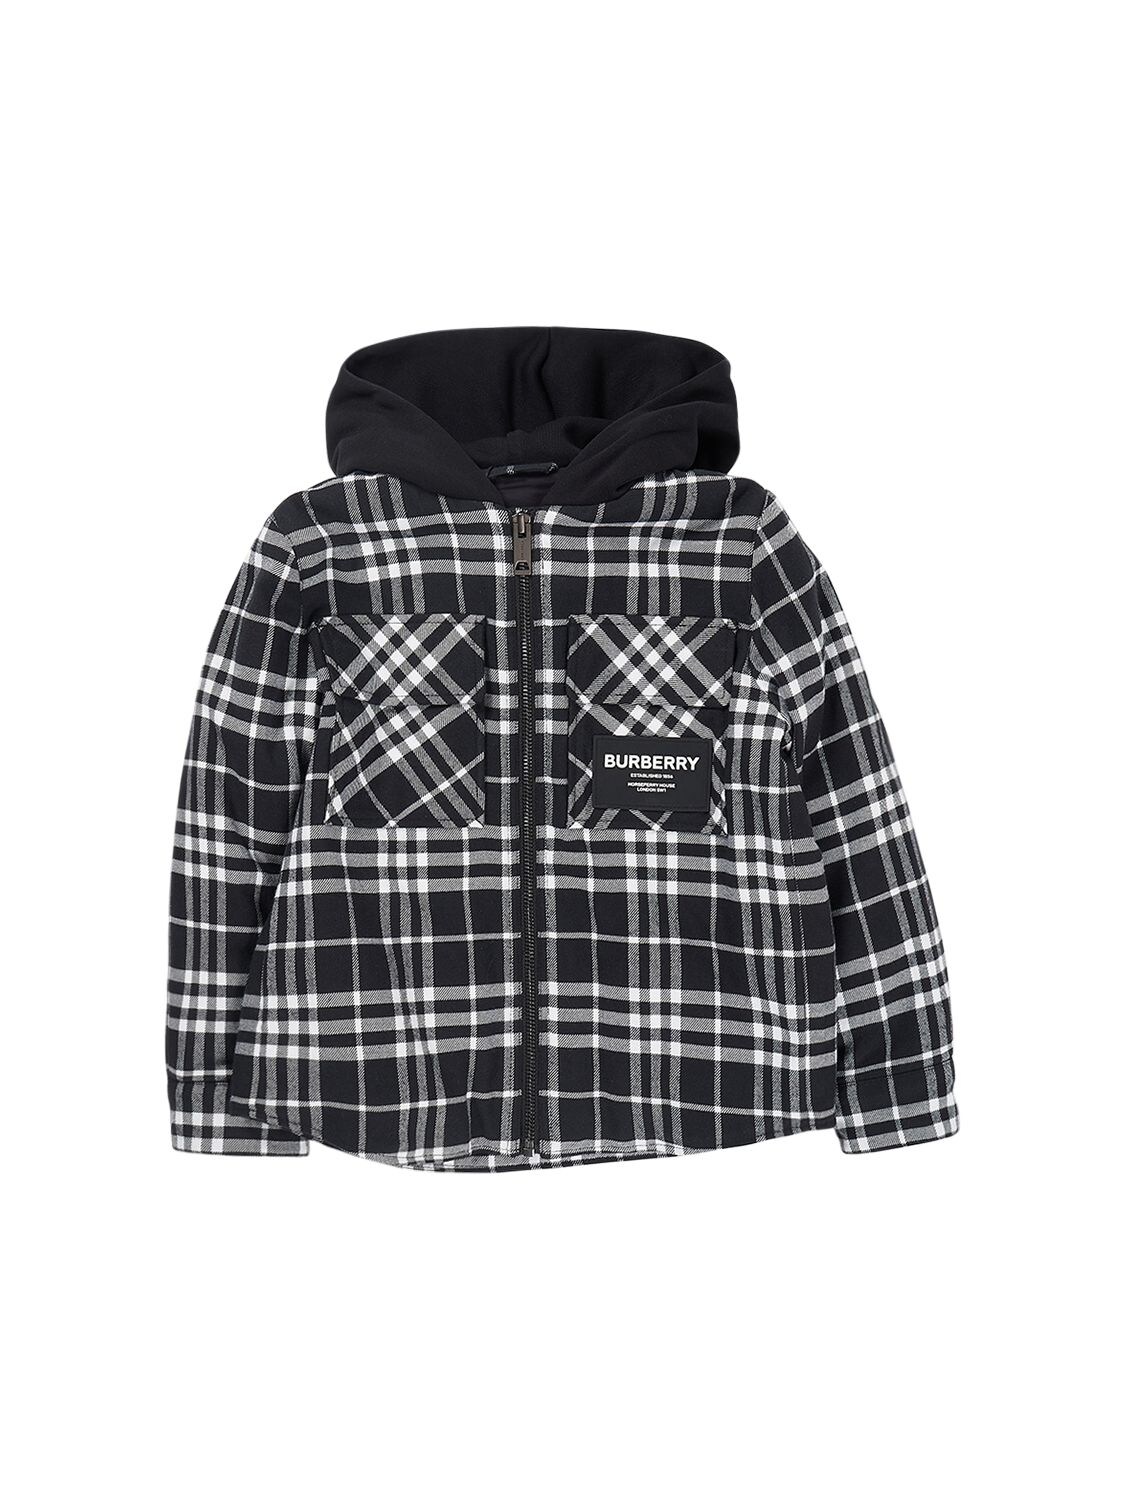 BURBERRY CHECK PRINT HOODED COTTON JACKET